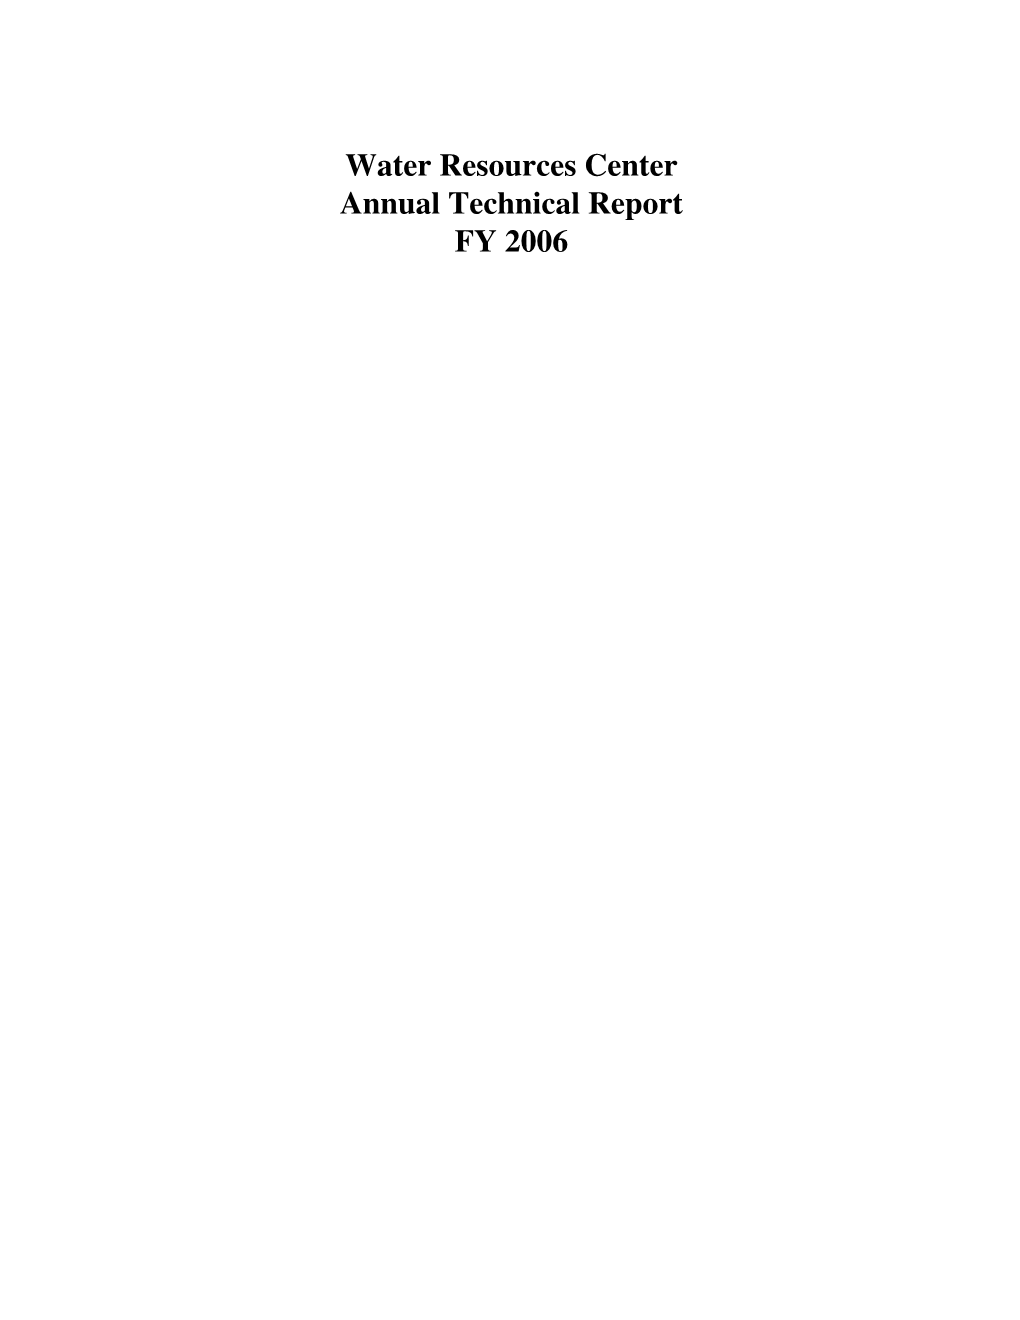 Water Resources Center Annual Technical Report FY 2006